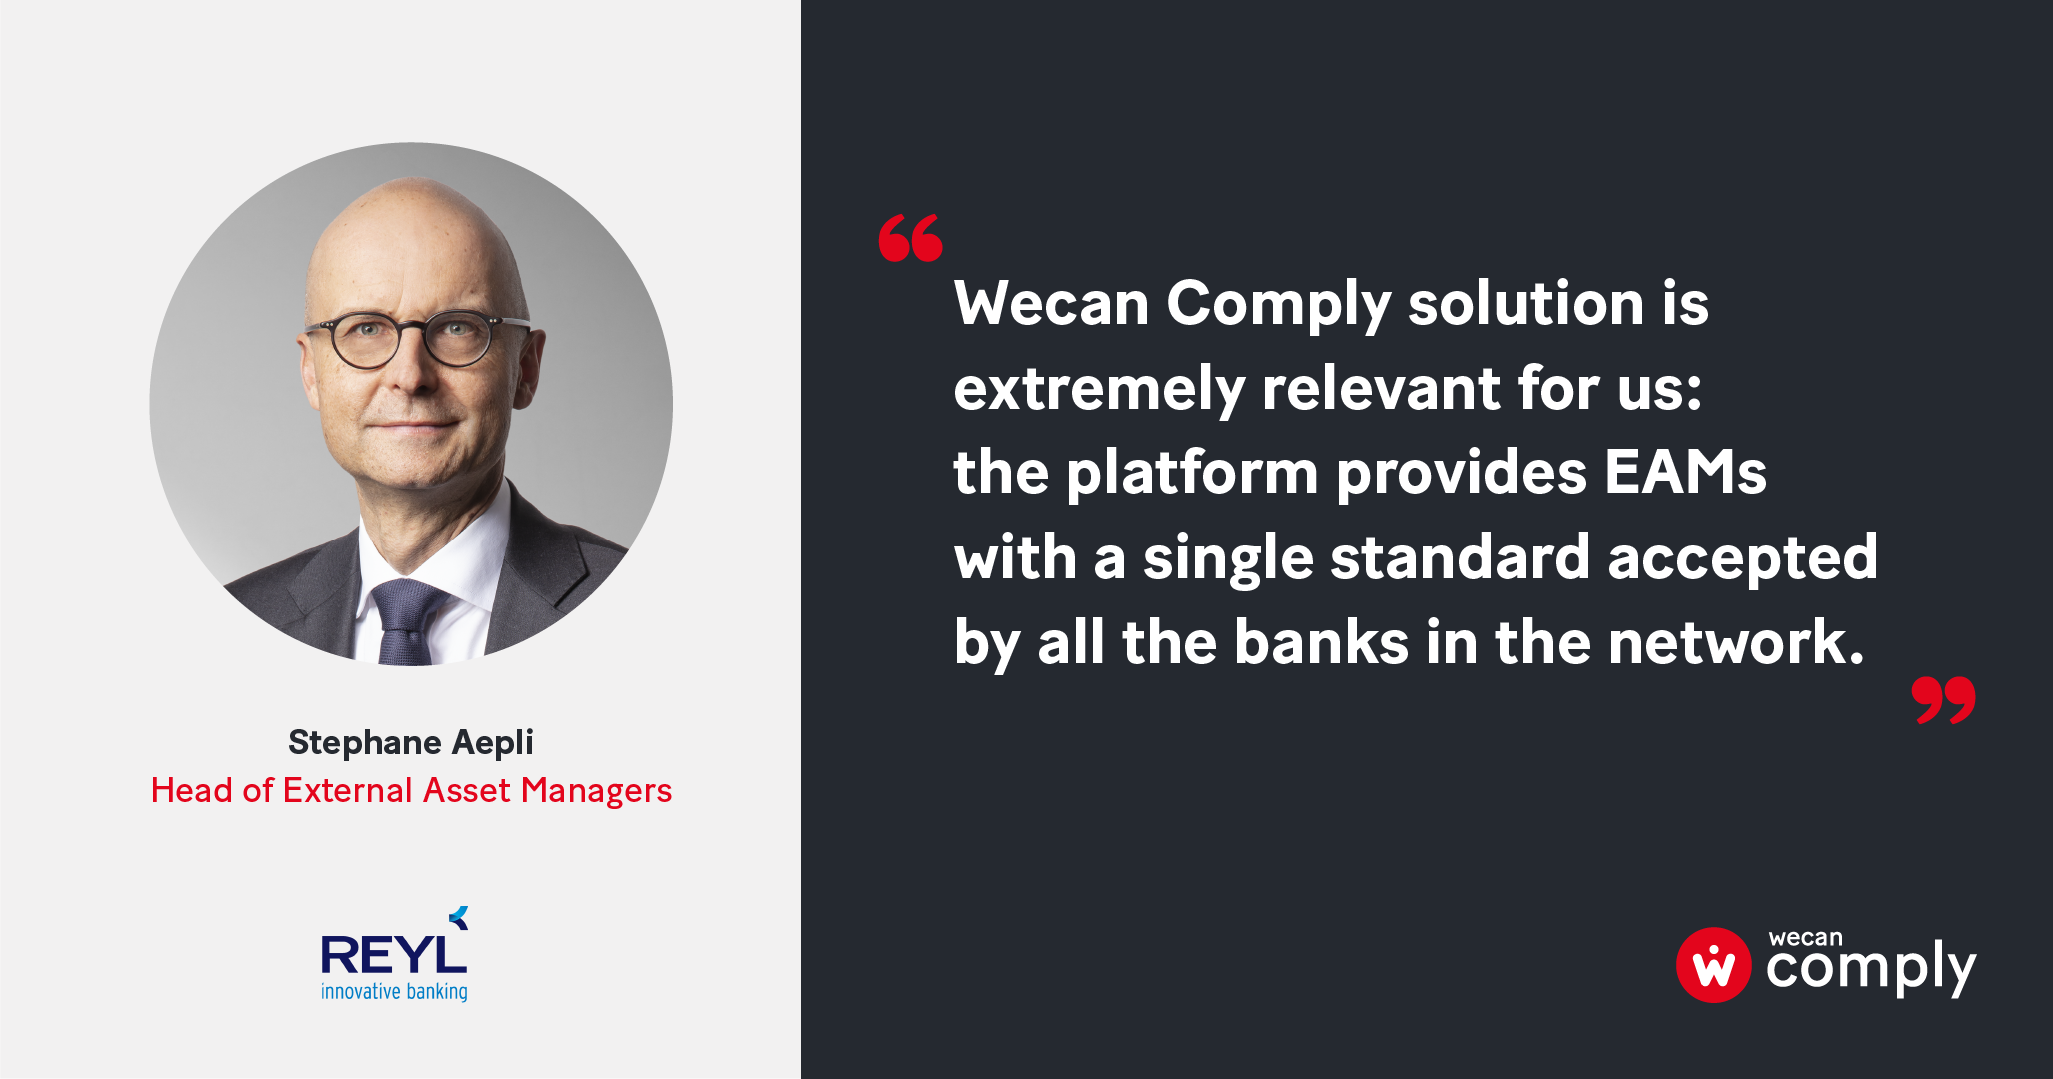 Innovation Reyl Wecan Comply